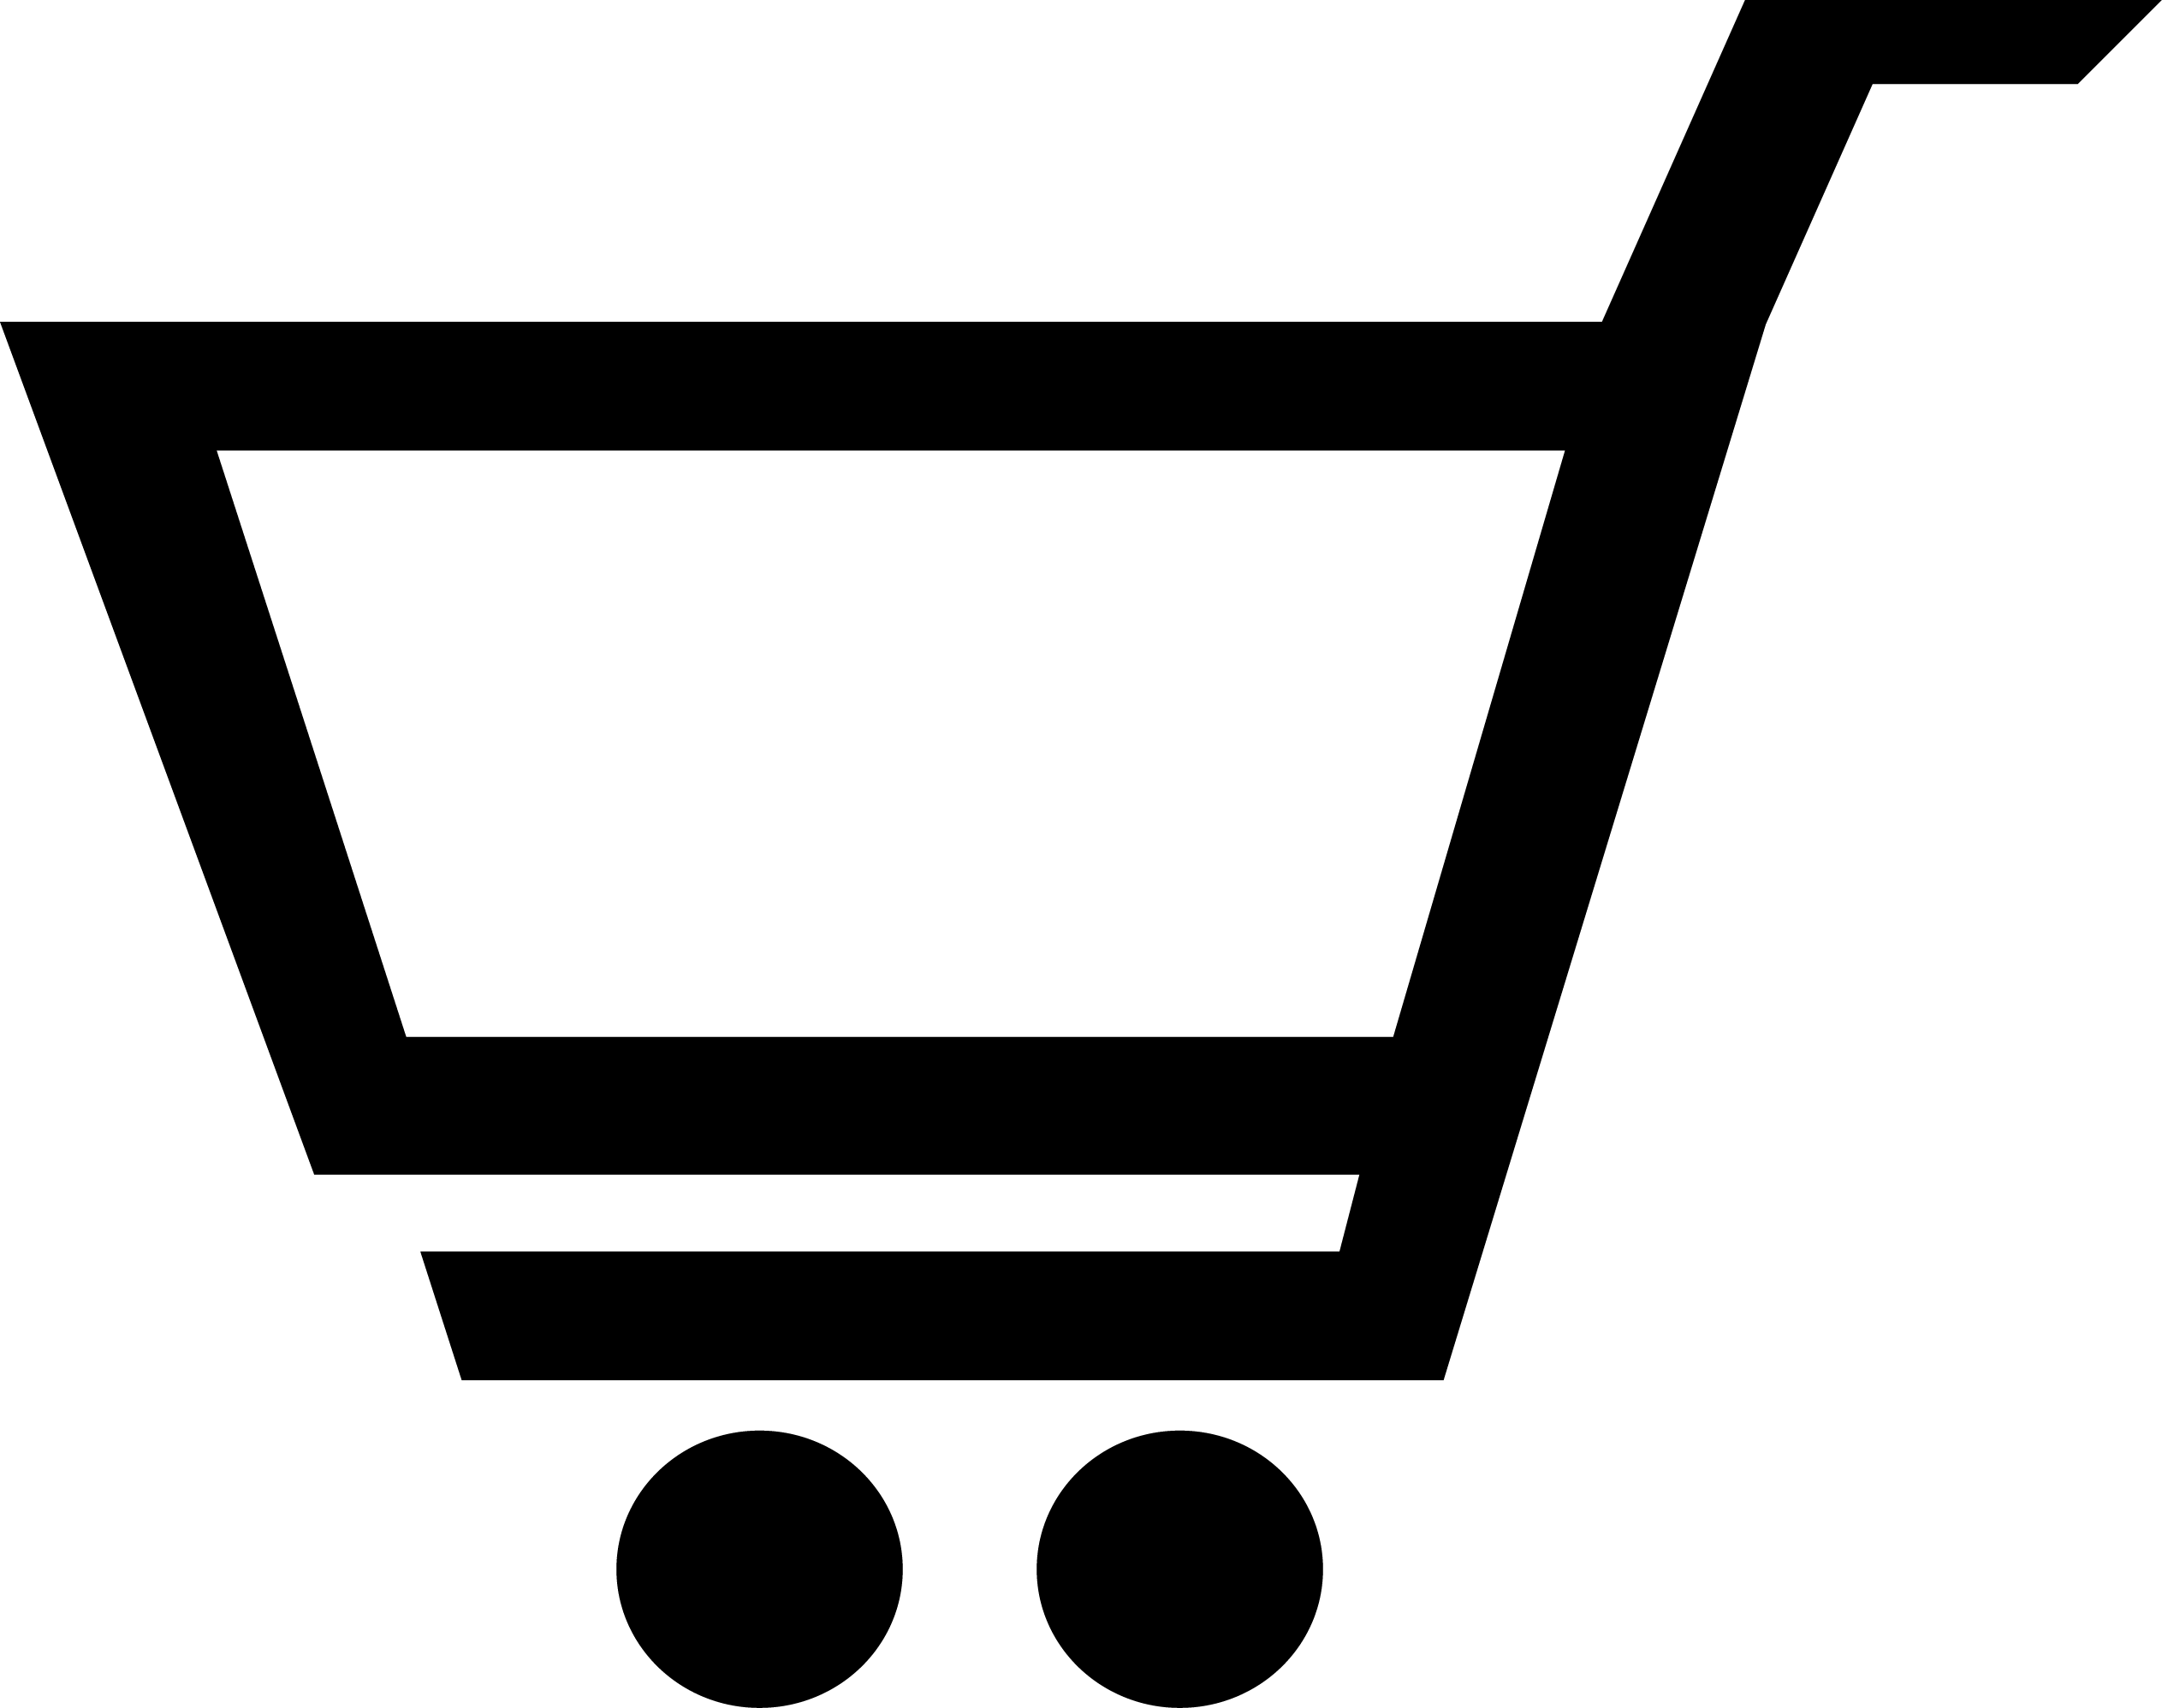 Shopping Trolley Clipart